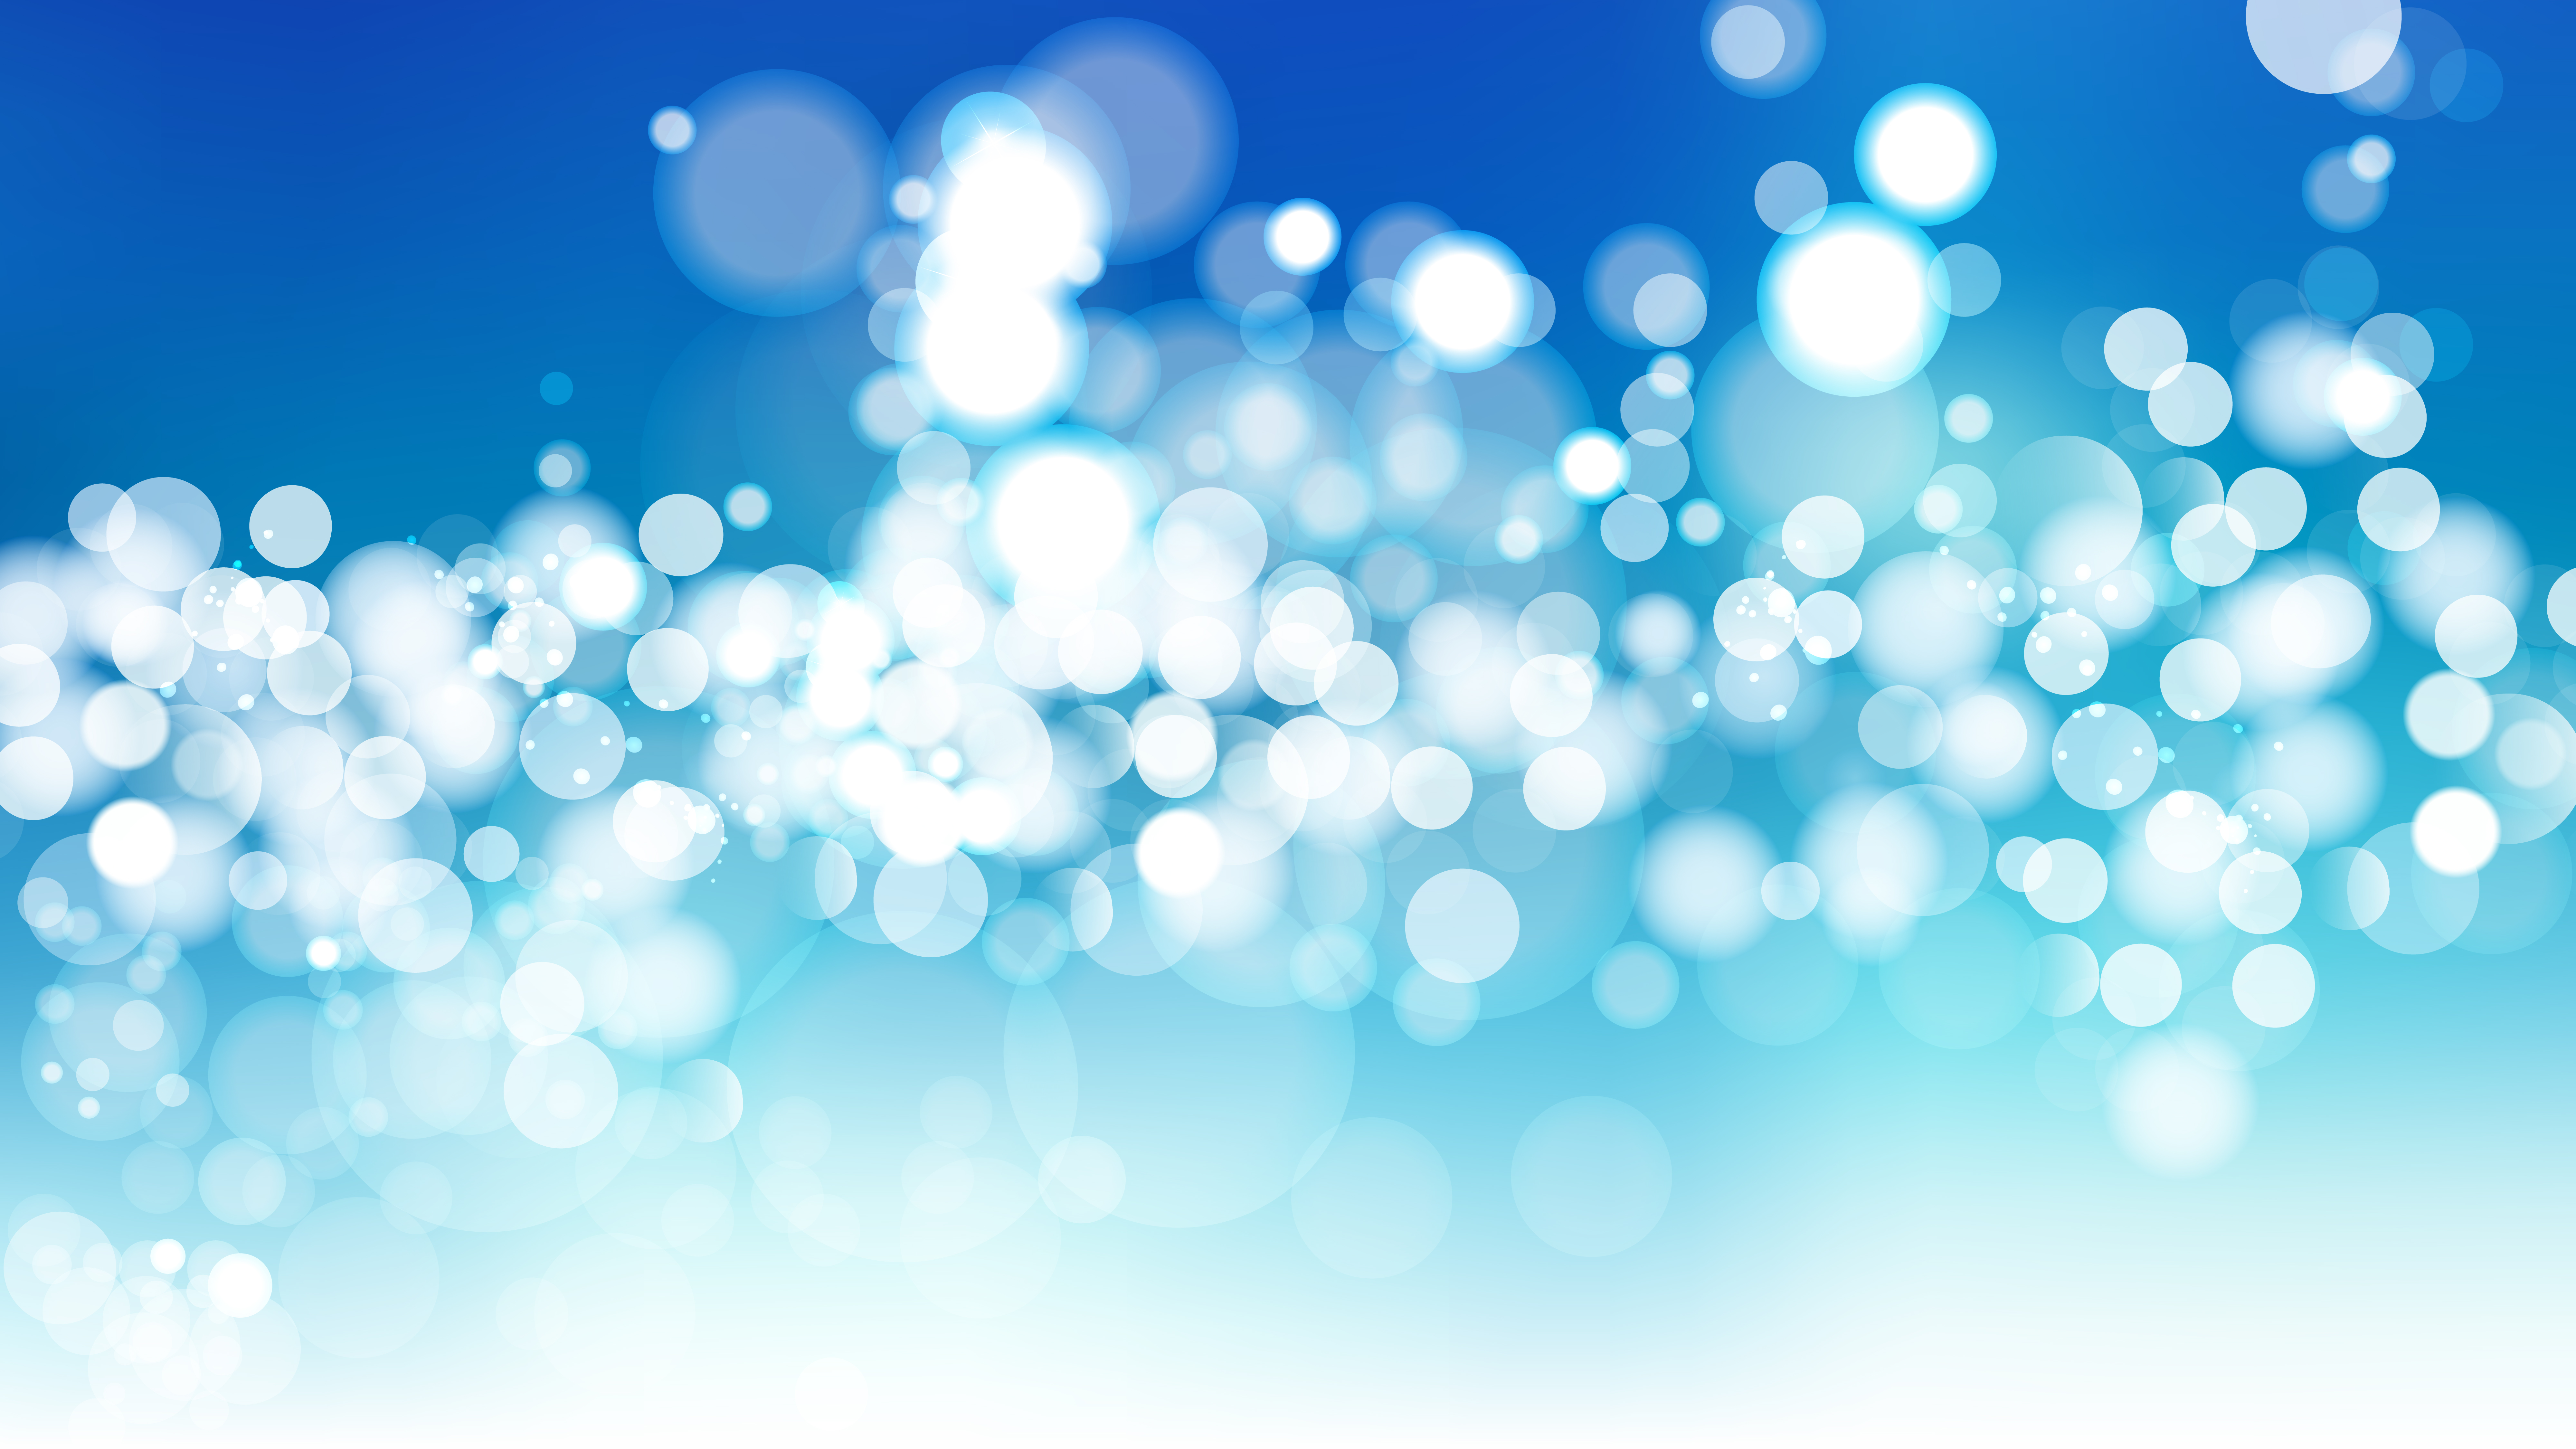 Free Blue and White Blur Lights Background Design